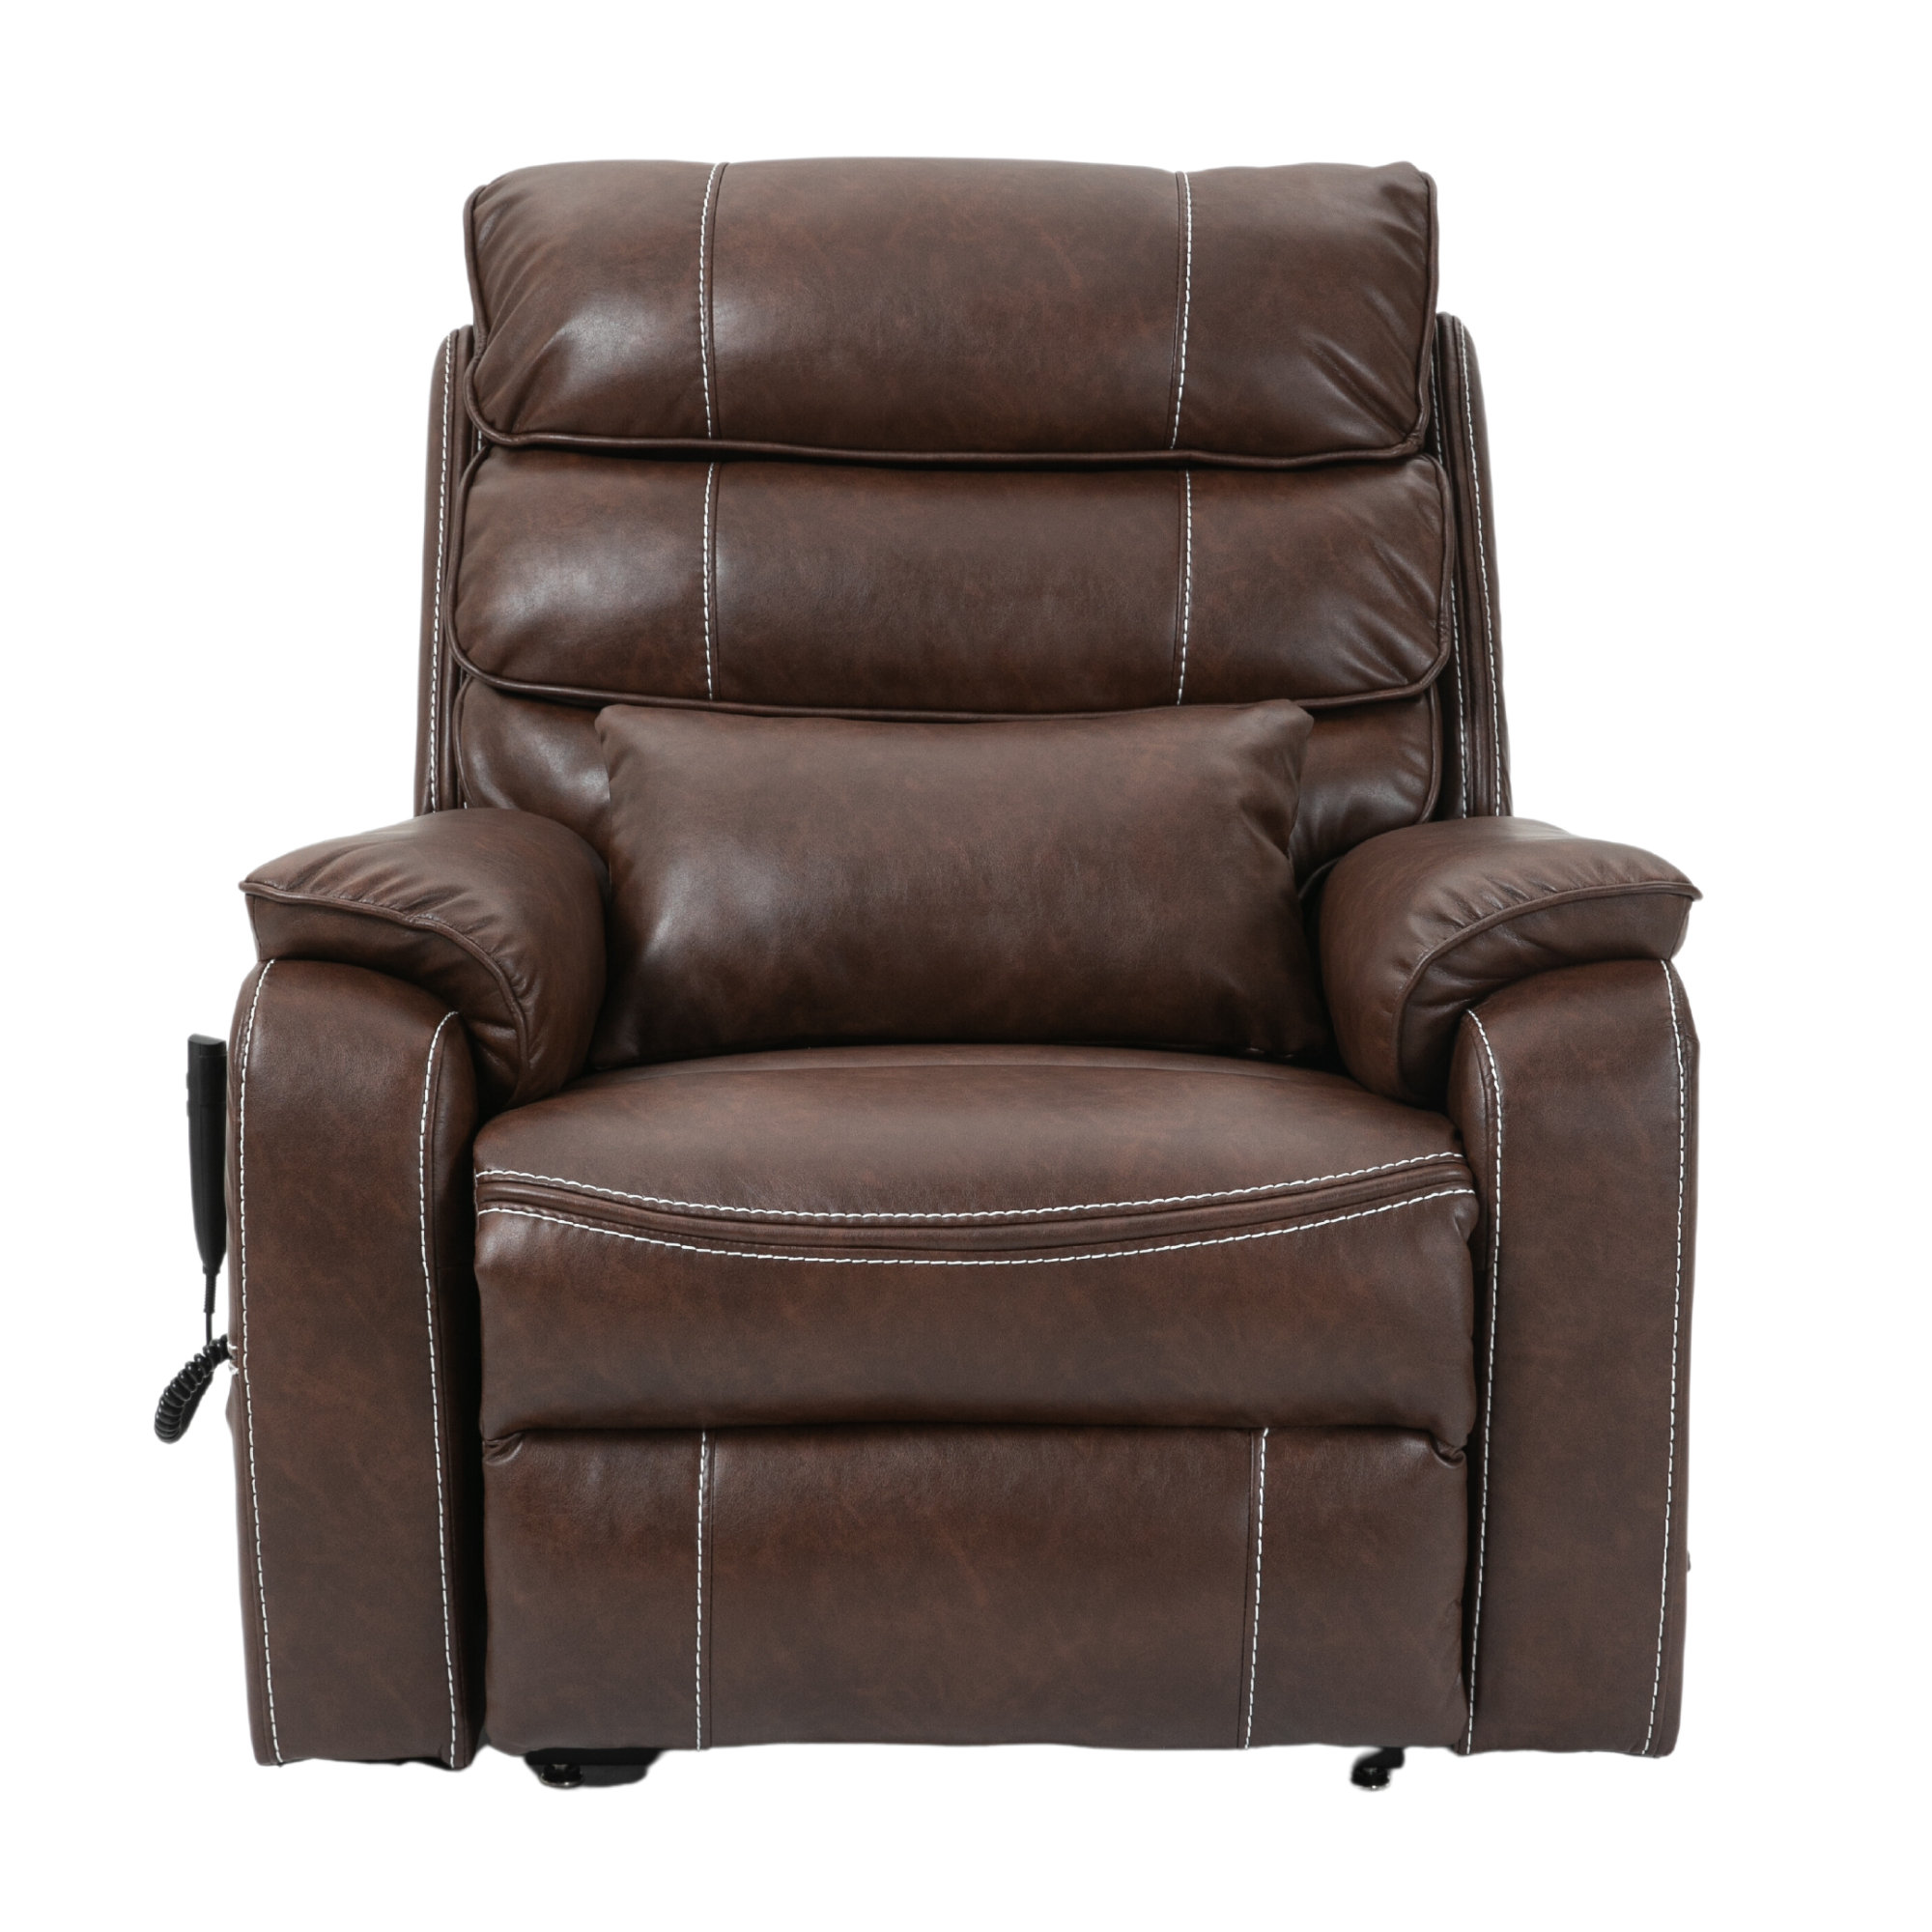 Genuine Leather Dual Okin Motor Lift Chairs Recliners for Elderly Wide Seat Living Room Sofa Latitude Run Body Fabric: Brown